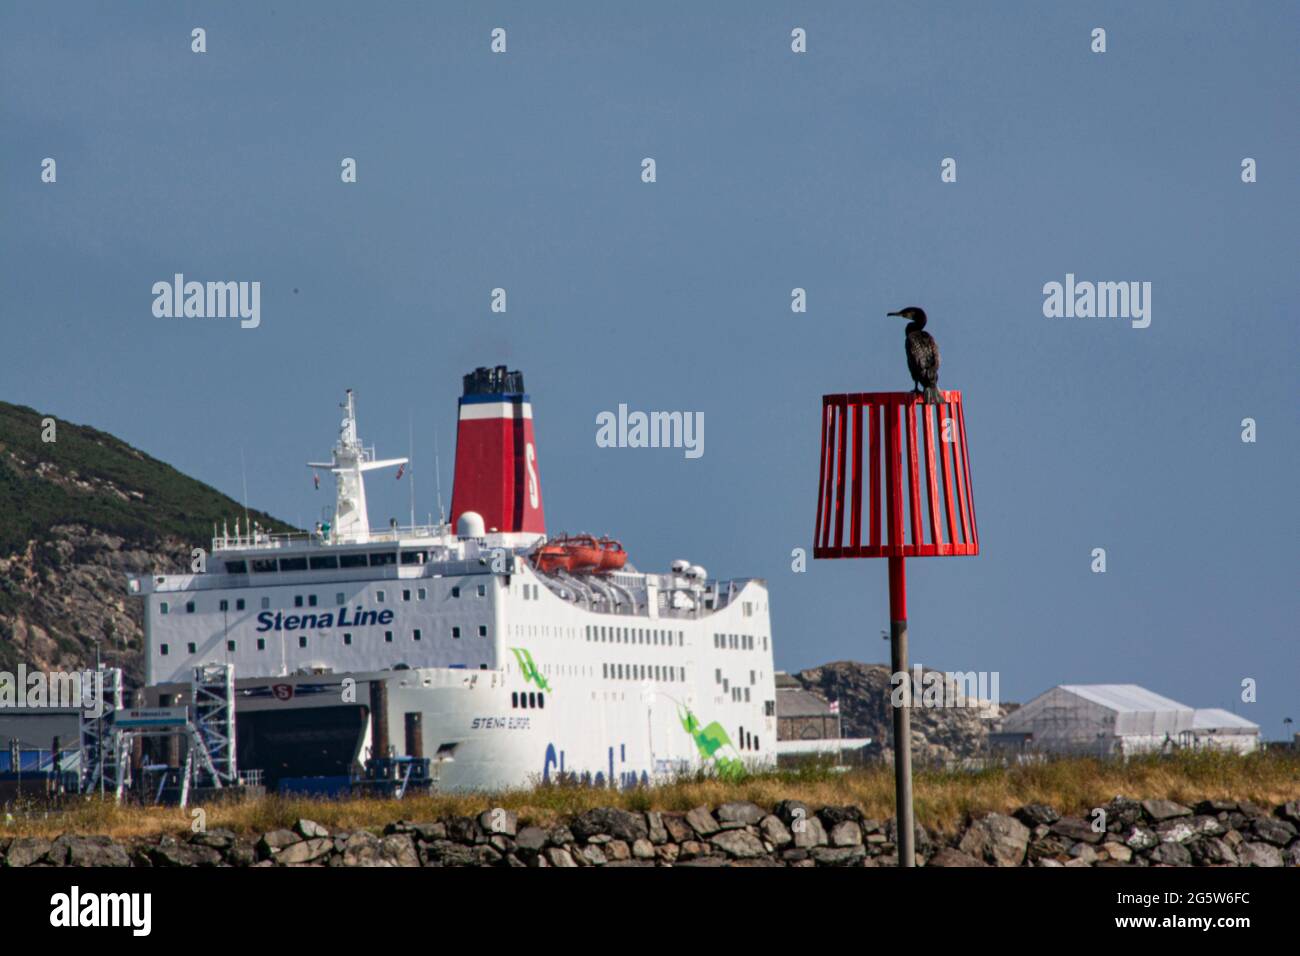 Fishguard, Pembrokeshire,  Stena line  back working  after  after the ferry Stena  Erope wich travels from Fishguard to Rosslare  had  been away  for  majoor  reapirs  for  many  weeks  leaving  the  port  empty . Credit: Debra Angel/Alamy Live News Stock Photo